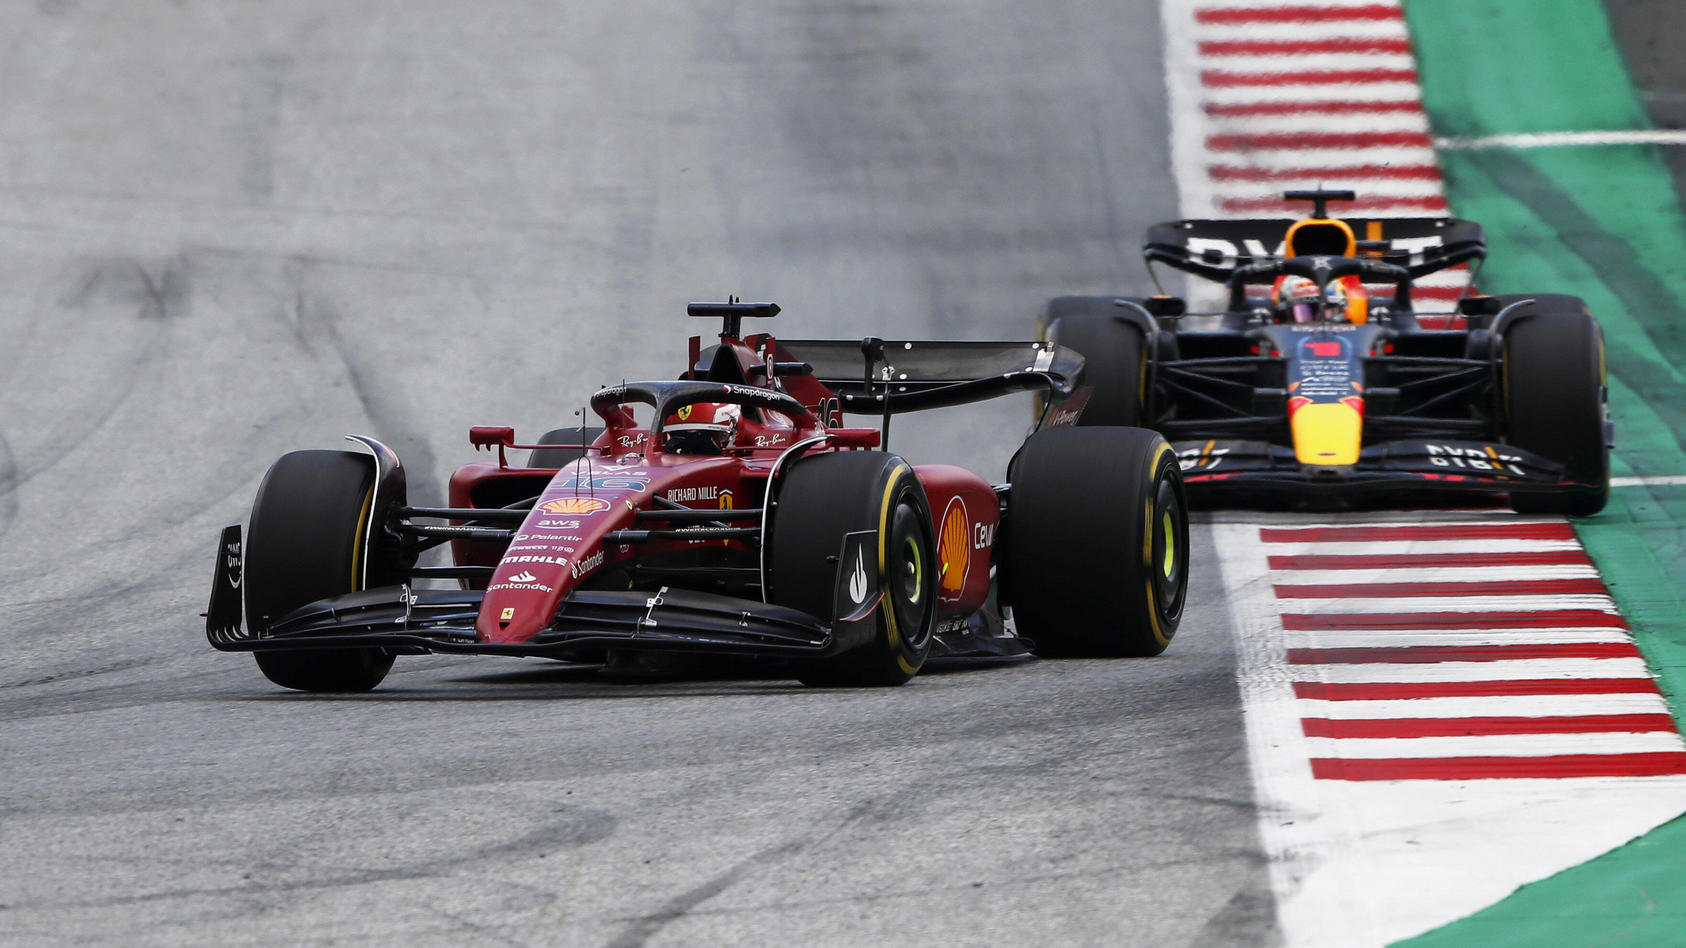  Formula 1 2022: Austrian GP RED BULL RING, AUSTRIA - JULY 10: Charles Leclerc, Ferrari F1-75, leads Max Verstappen, Red Bull Racing RB18 during the Austrian GP at Red Bull Ring on Sunday July 10, 2022 in Spielberg, Austria. Photo by Zak Mauger / LAT